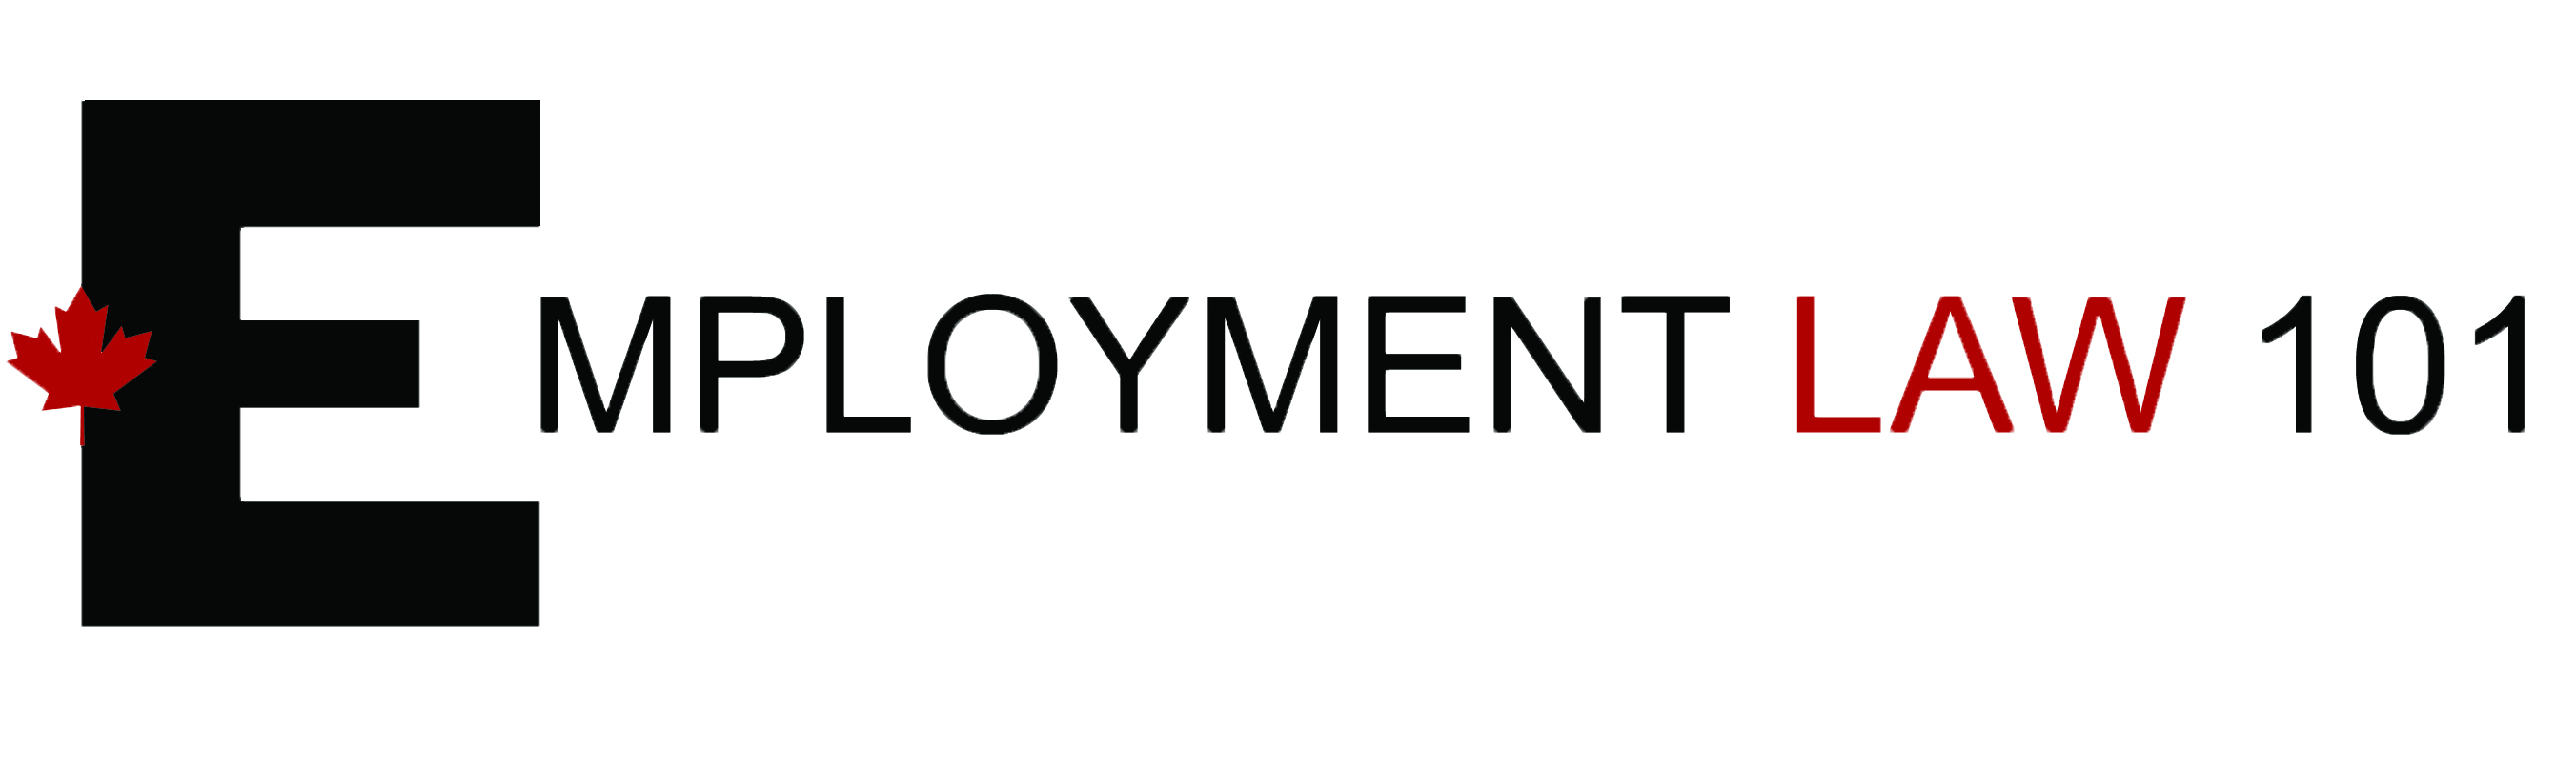 Home - Employment Law 101 - Legal Resource - Ontario, Canada